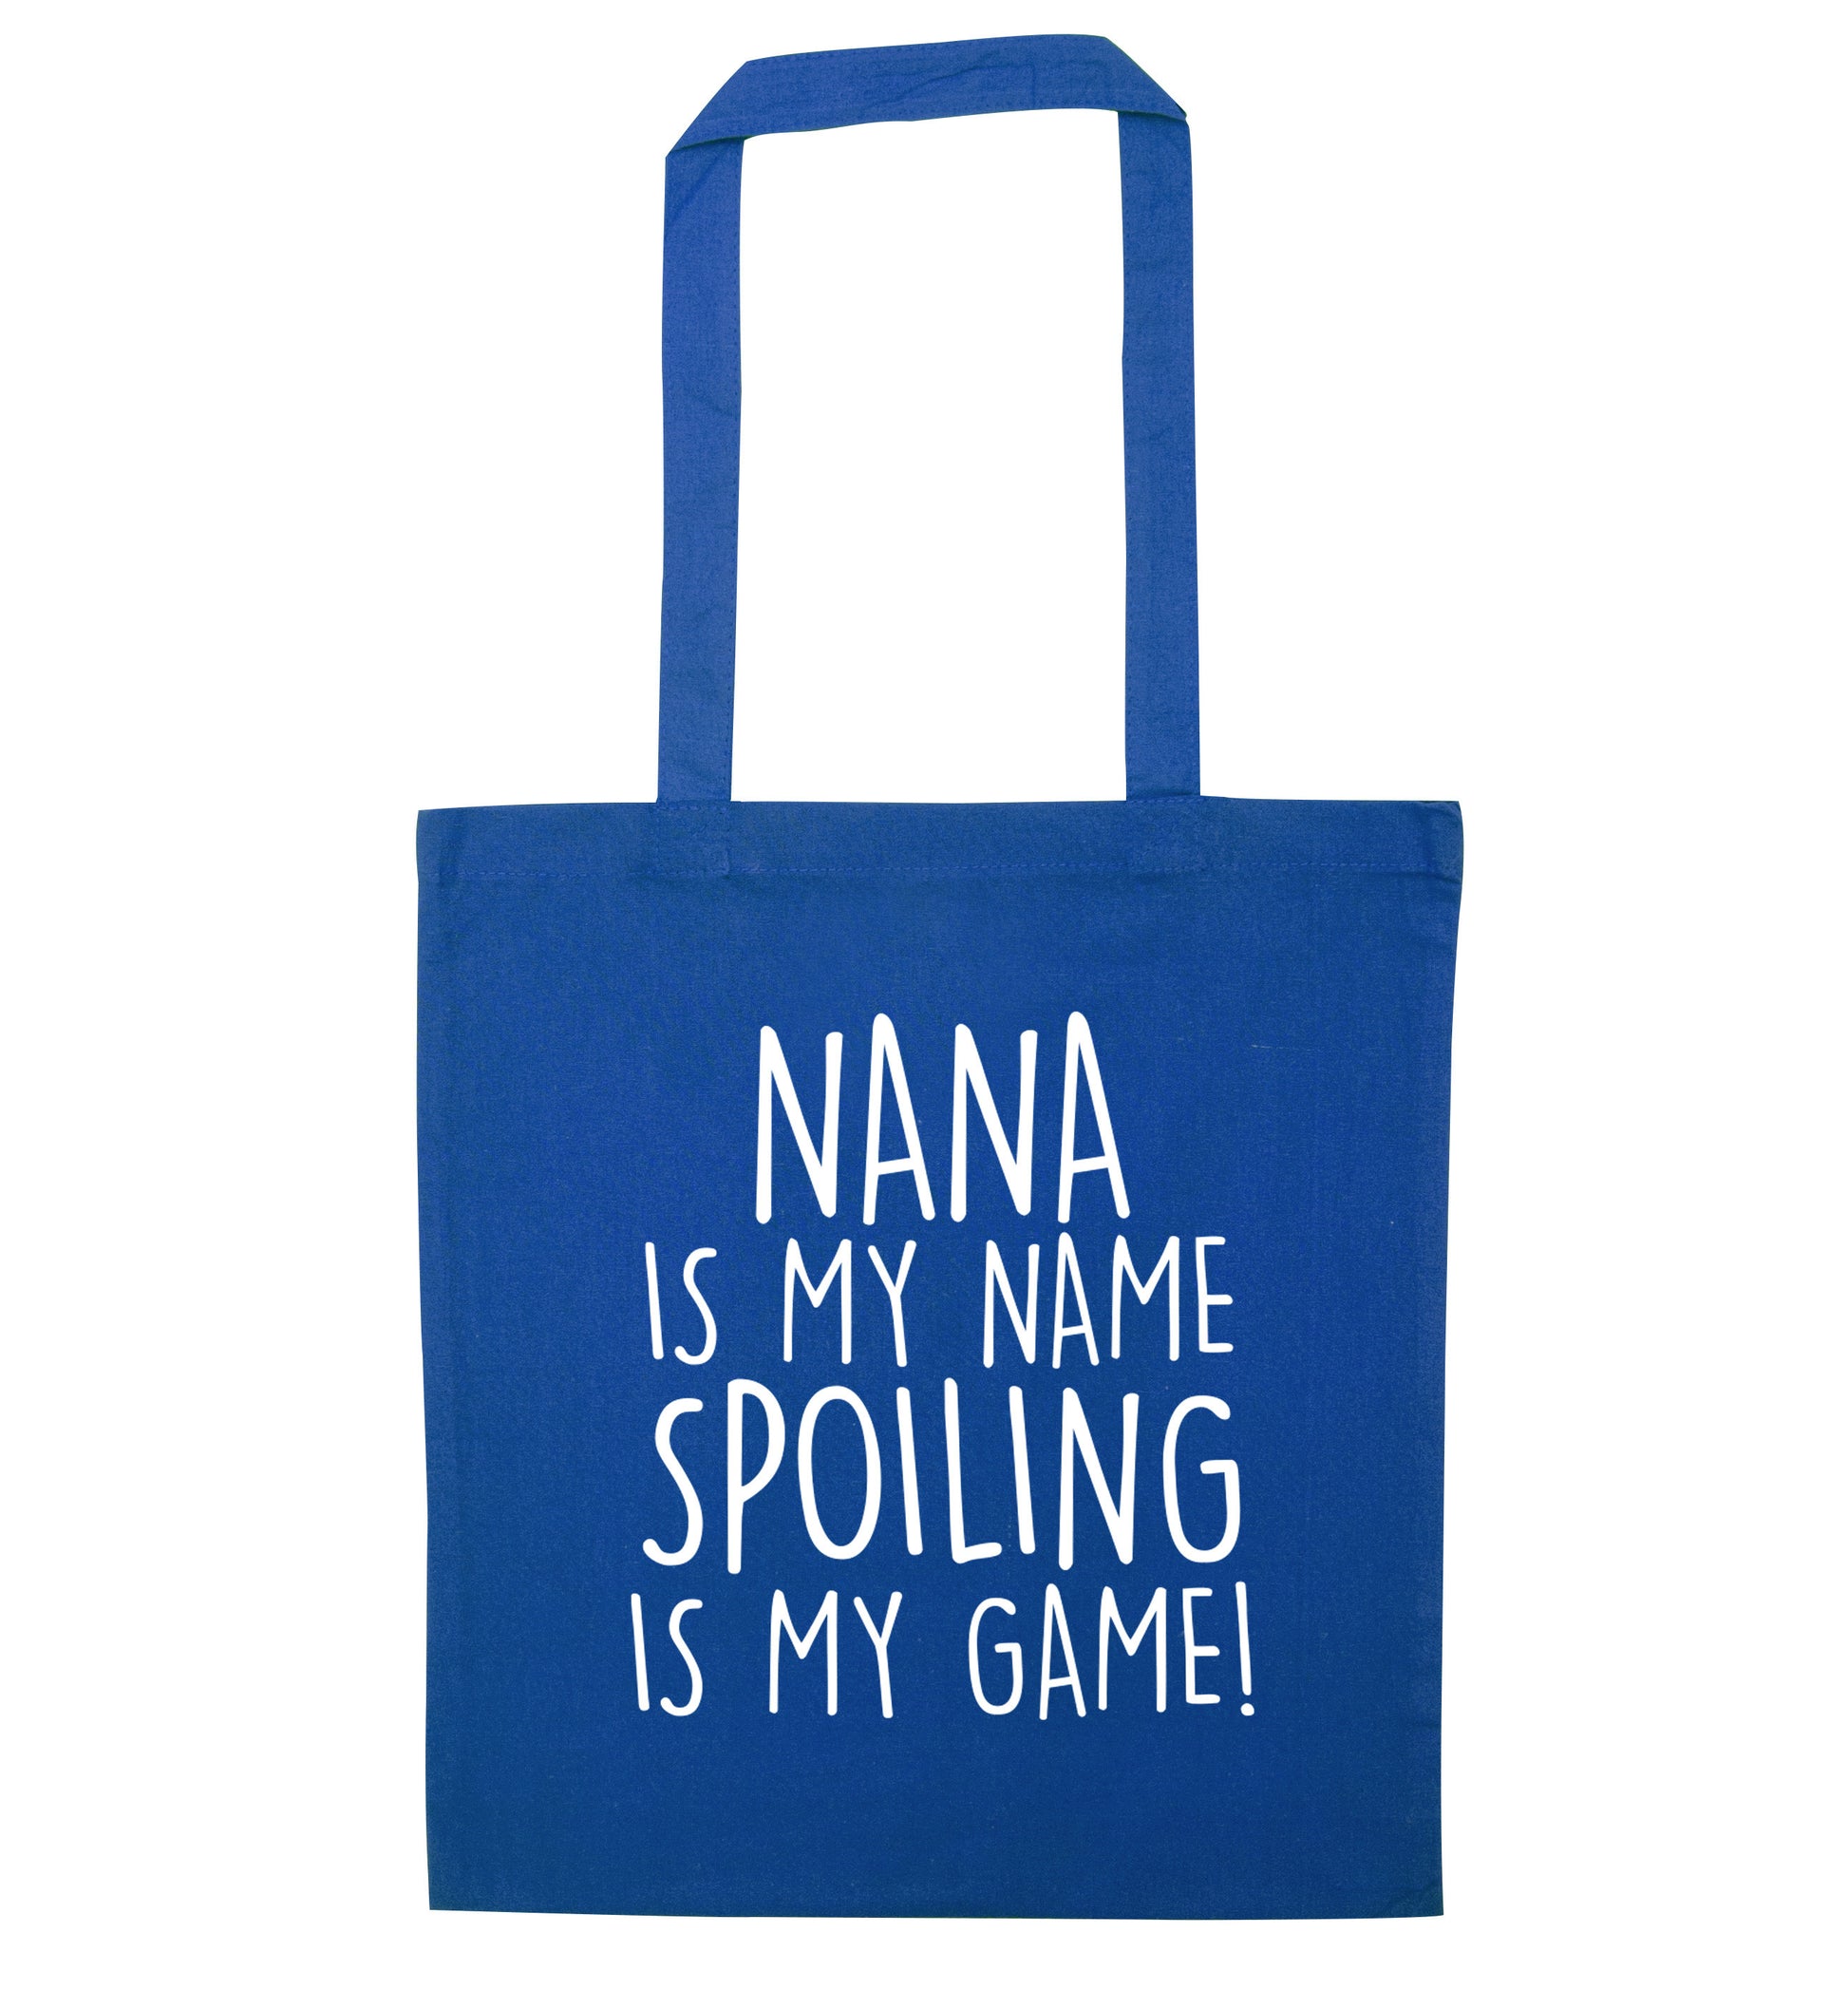 Nana is my name, spoiling is my game blue tote bag